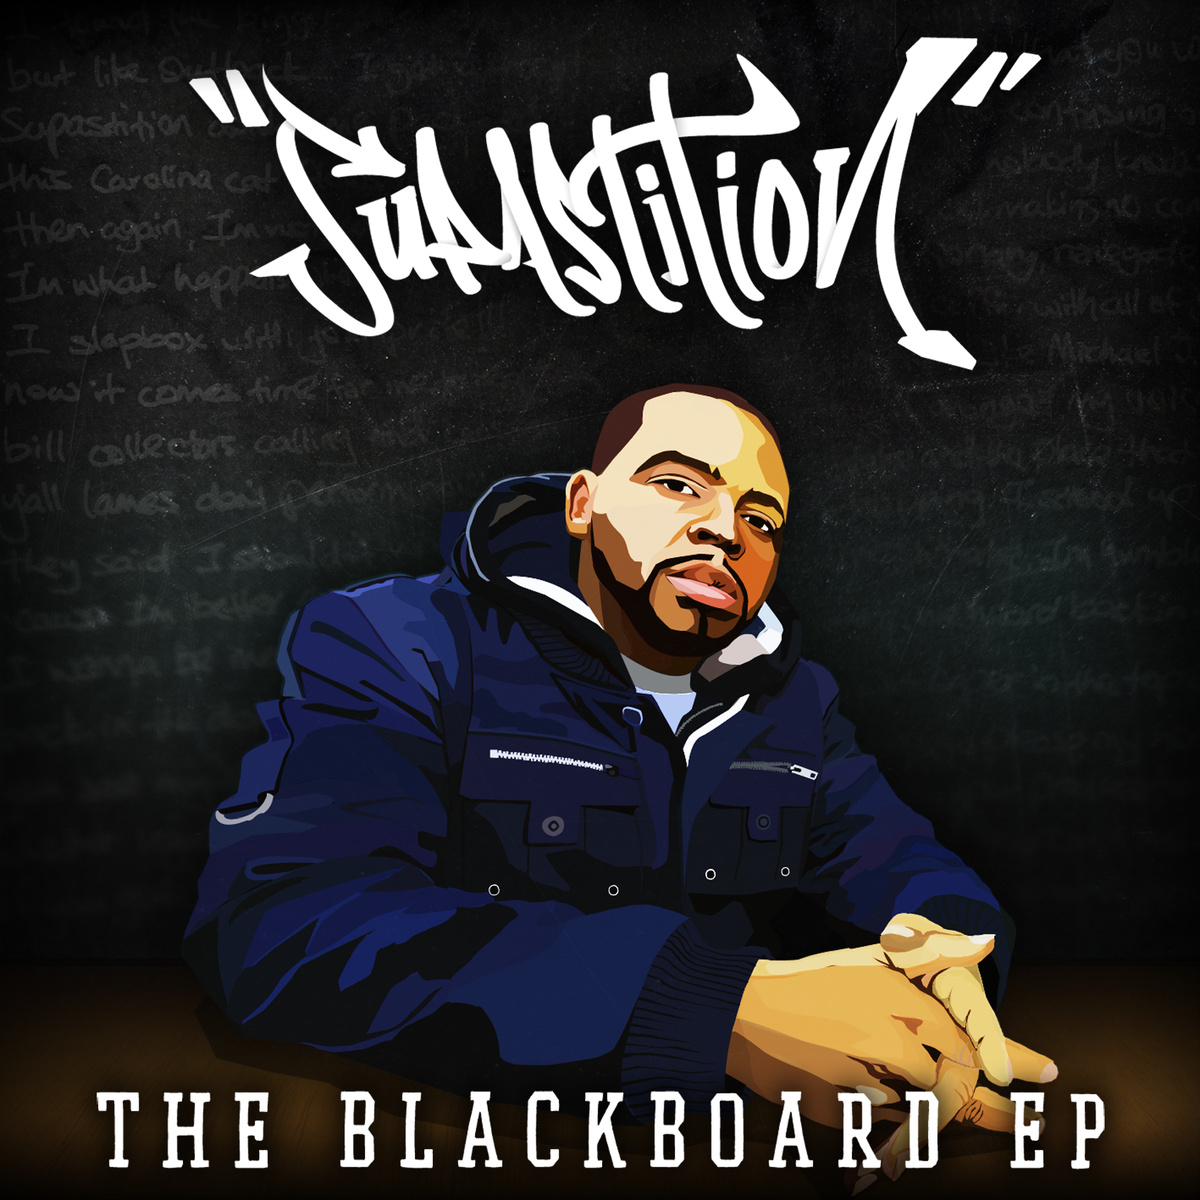 Supastition "The Blackboard (Deluxe Edition)" Release | @Supastition_NC